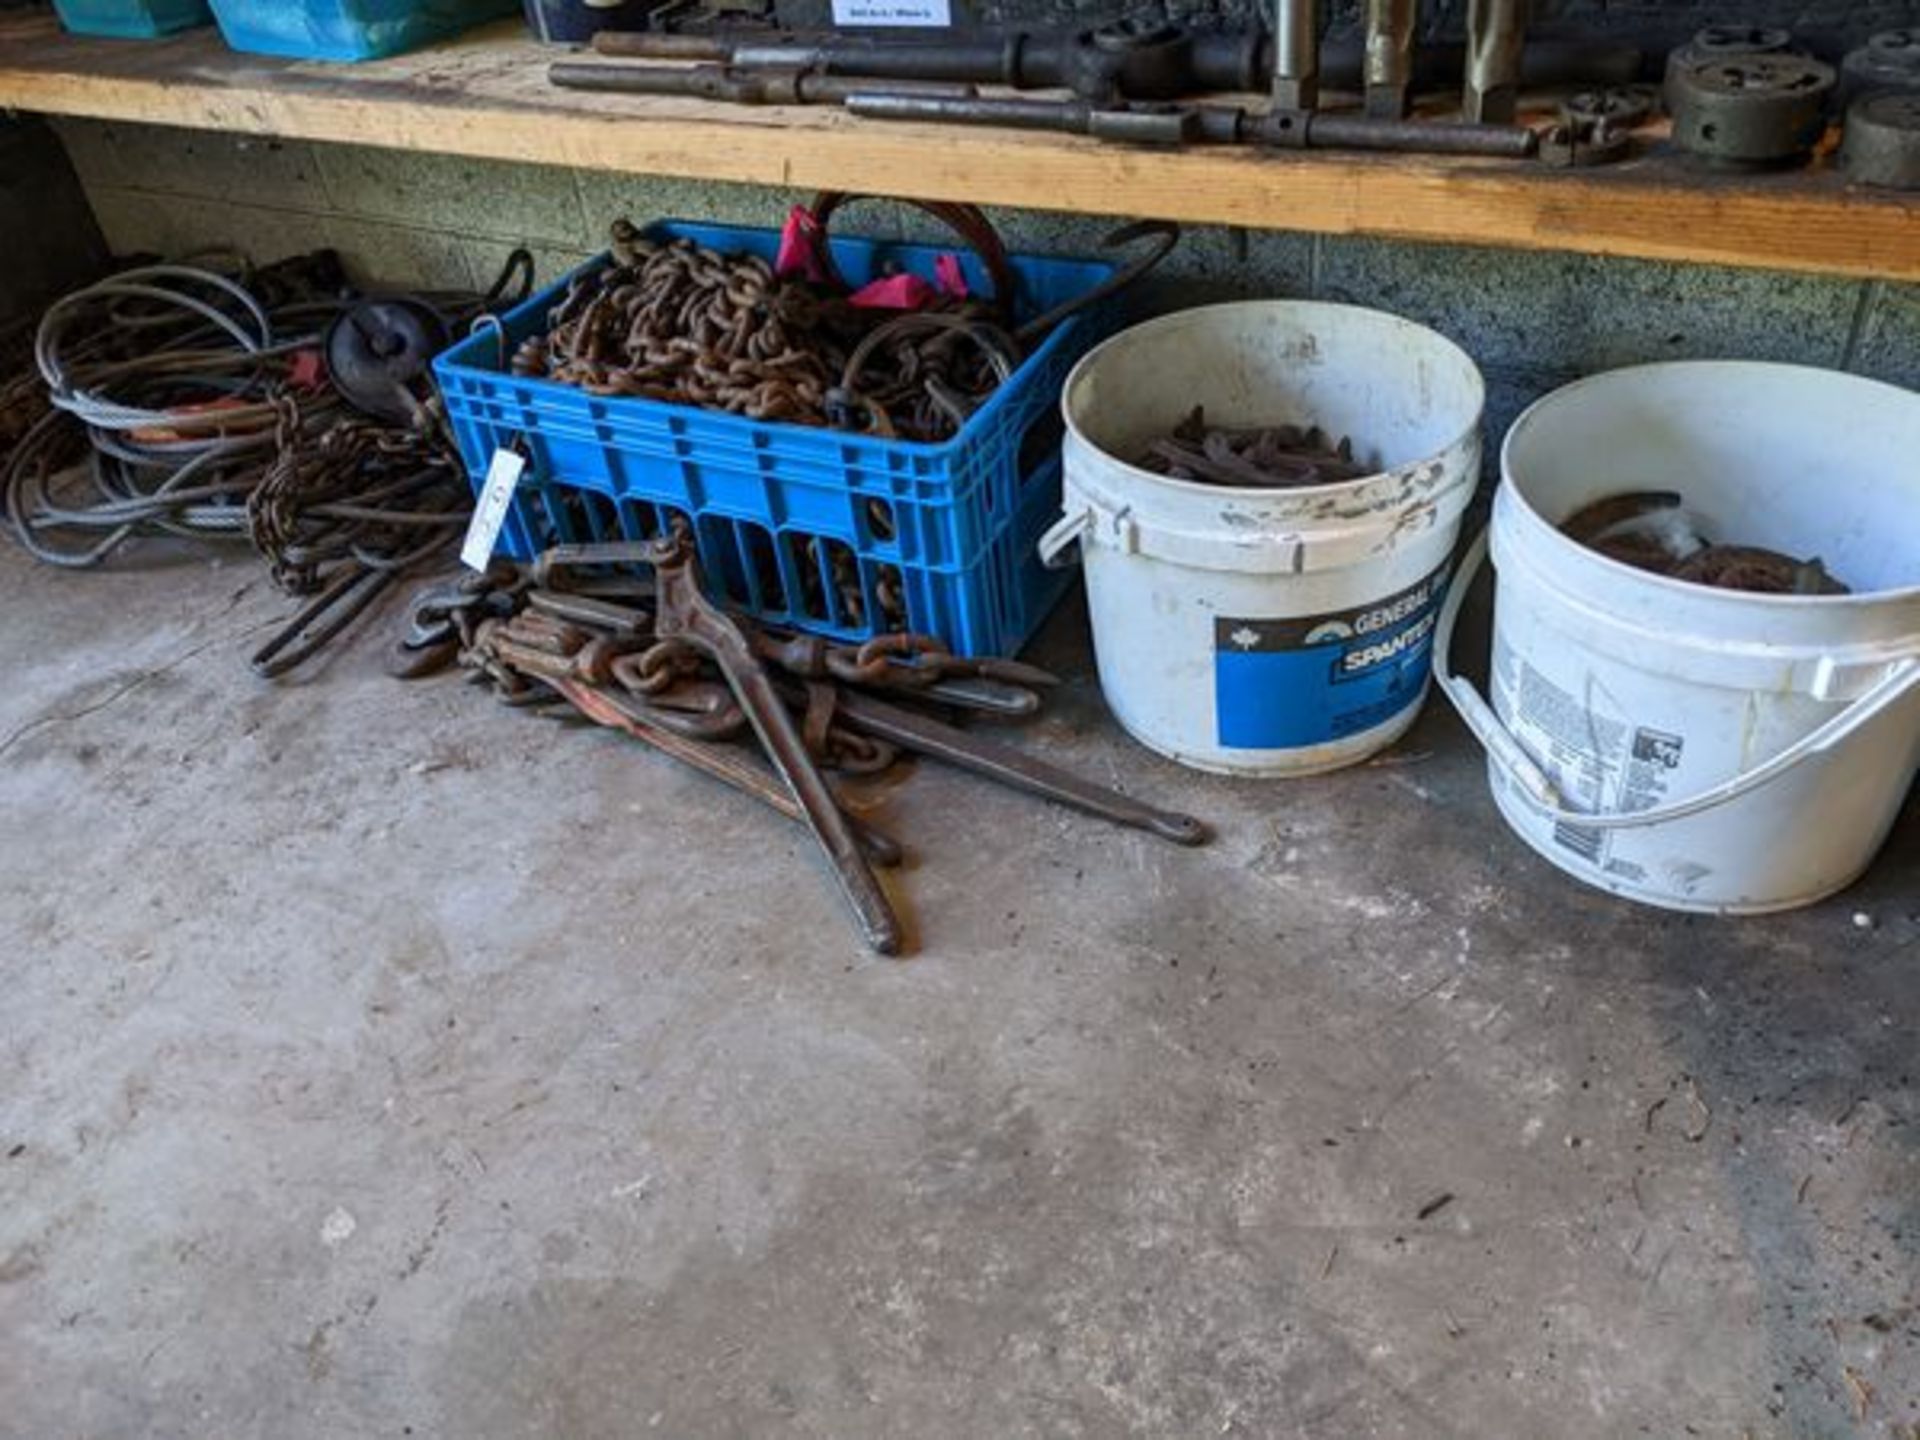 Lot of Chains, Winches, Cables and Lucky Horseshoes